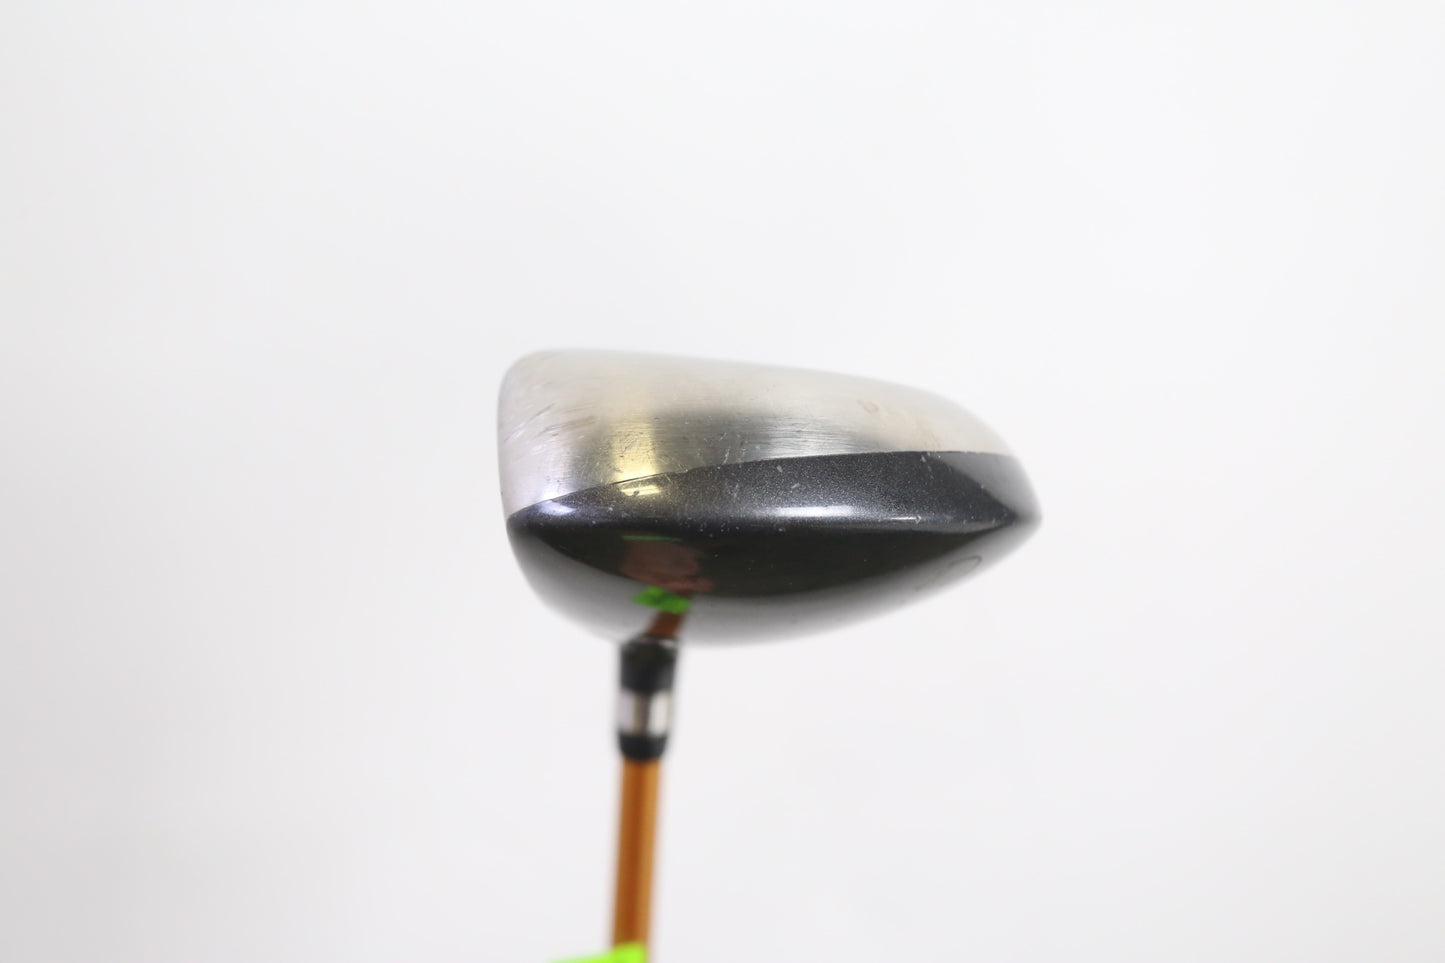 Used Cleveland Launcher Ti 3-Wood - Right-Handed - 15 Degrees - Regular Flex